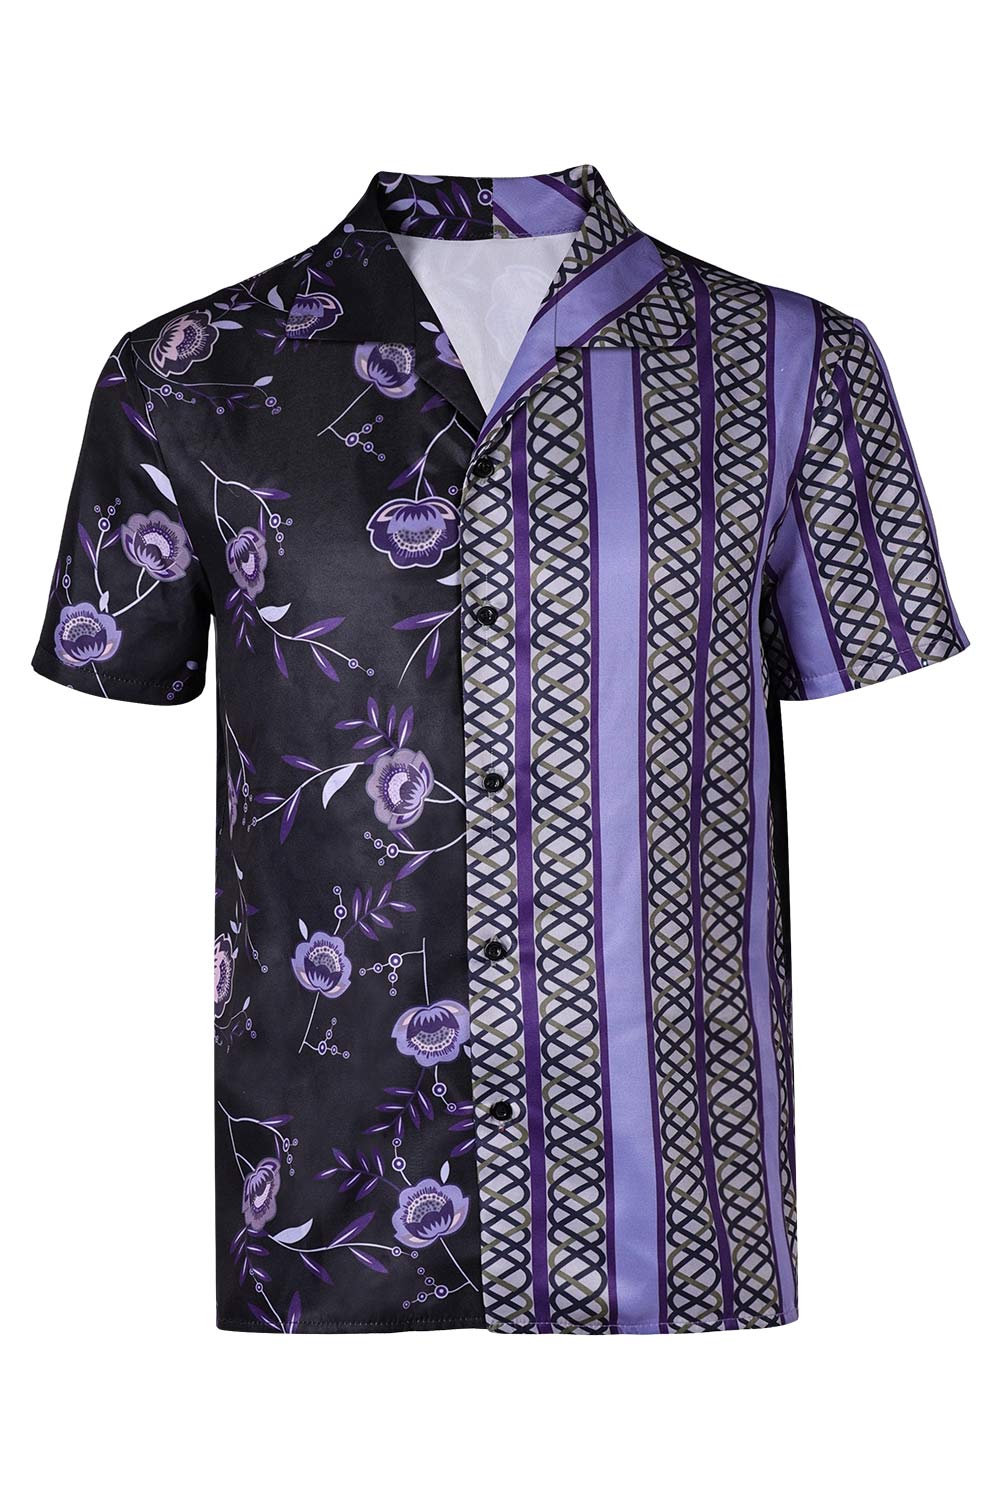 Movie Road House 2024 Knox Printed Purple T-shirt Outfits Halloween Carnival Suit Cosplay Costume  